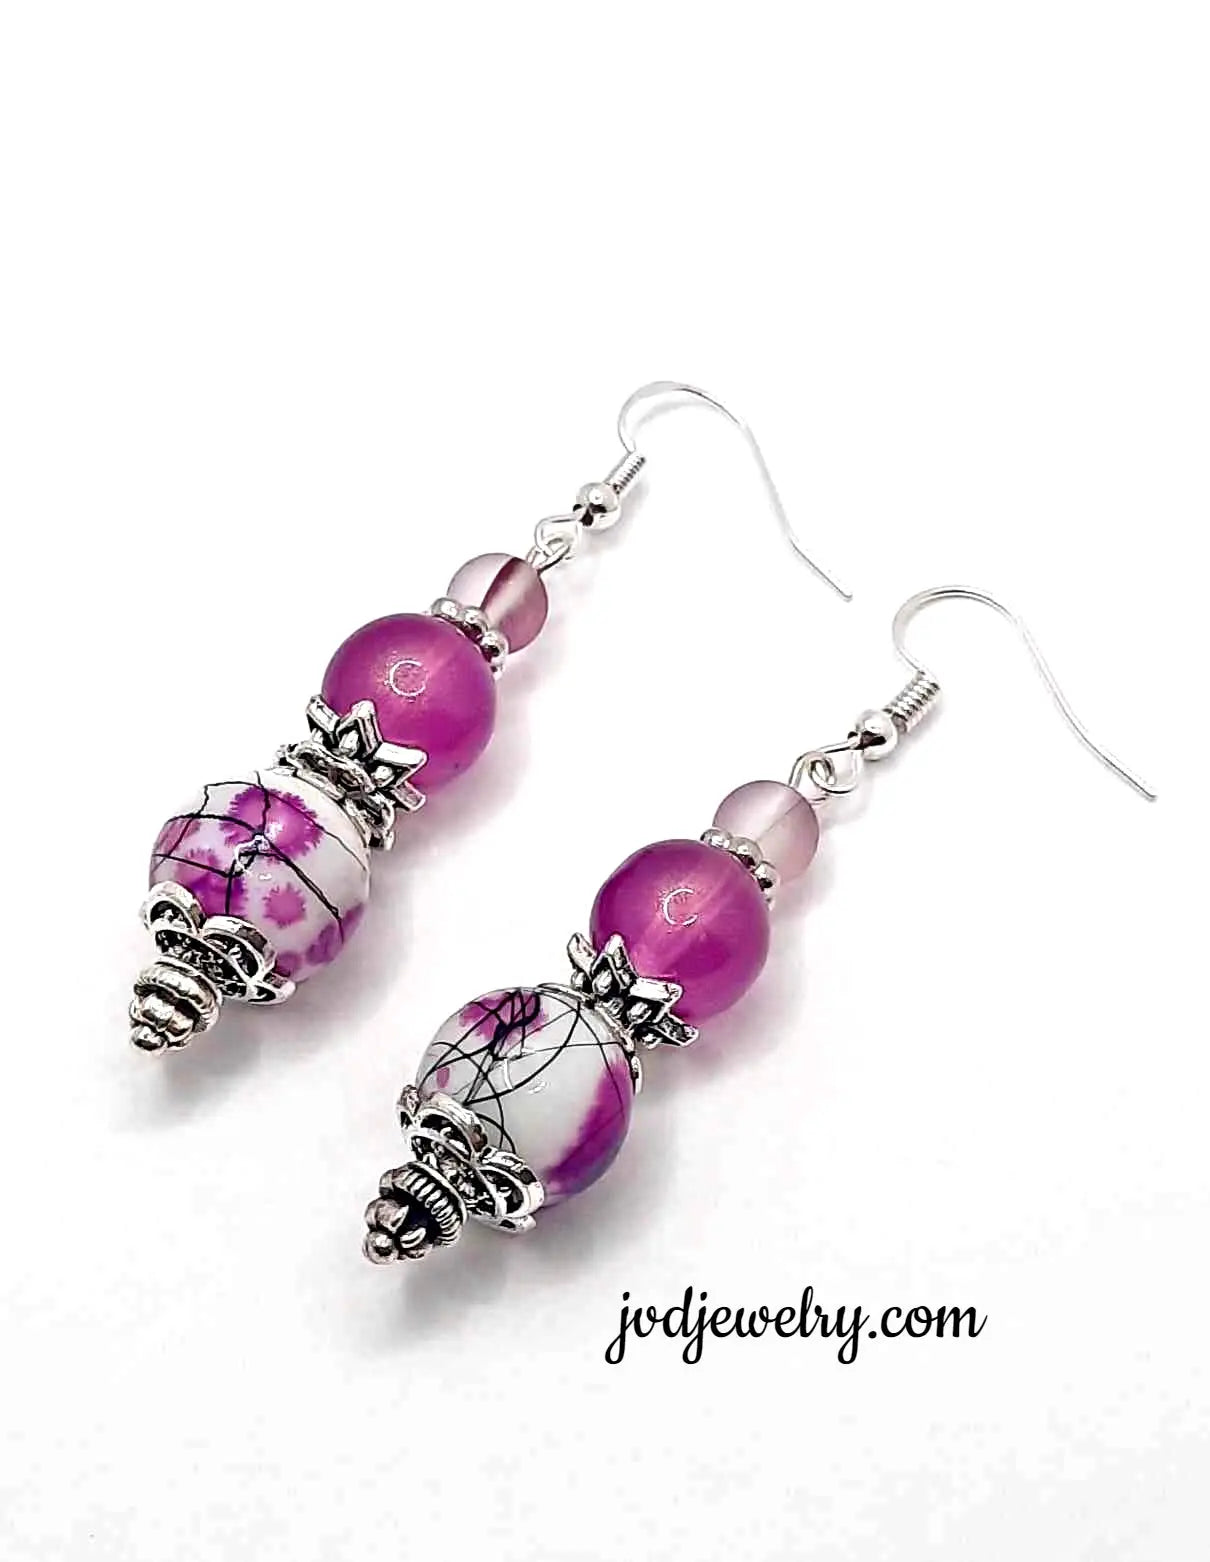 2.25 inches glass beaded earrings - Image #1